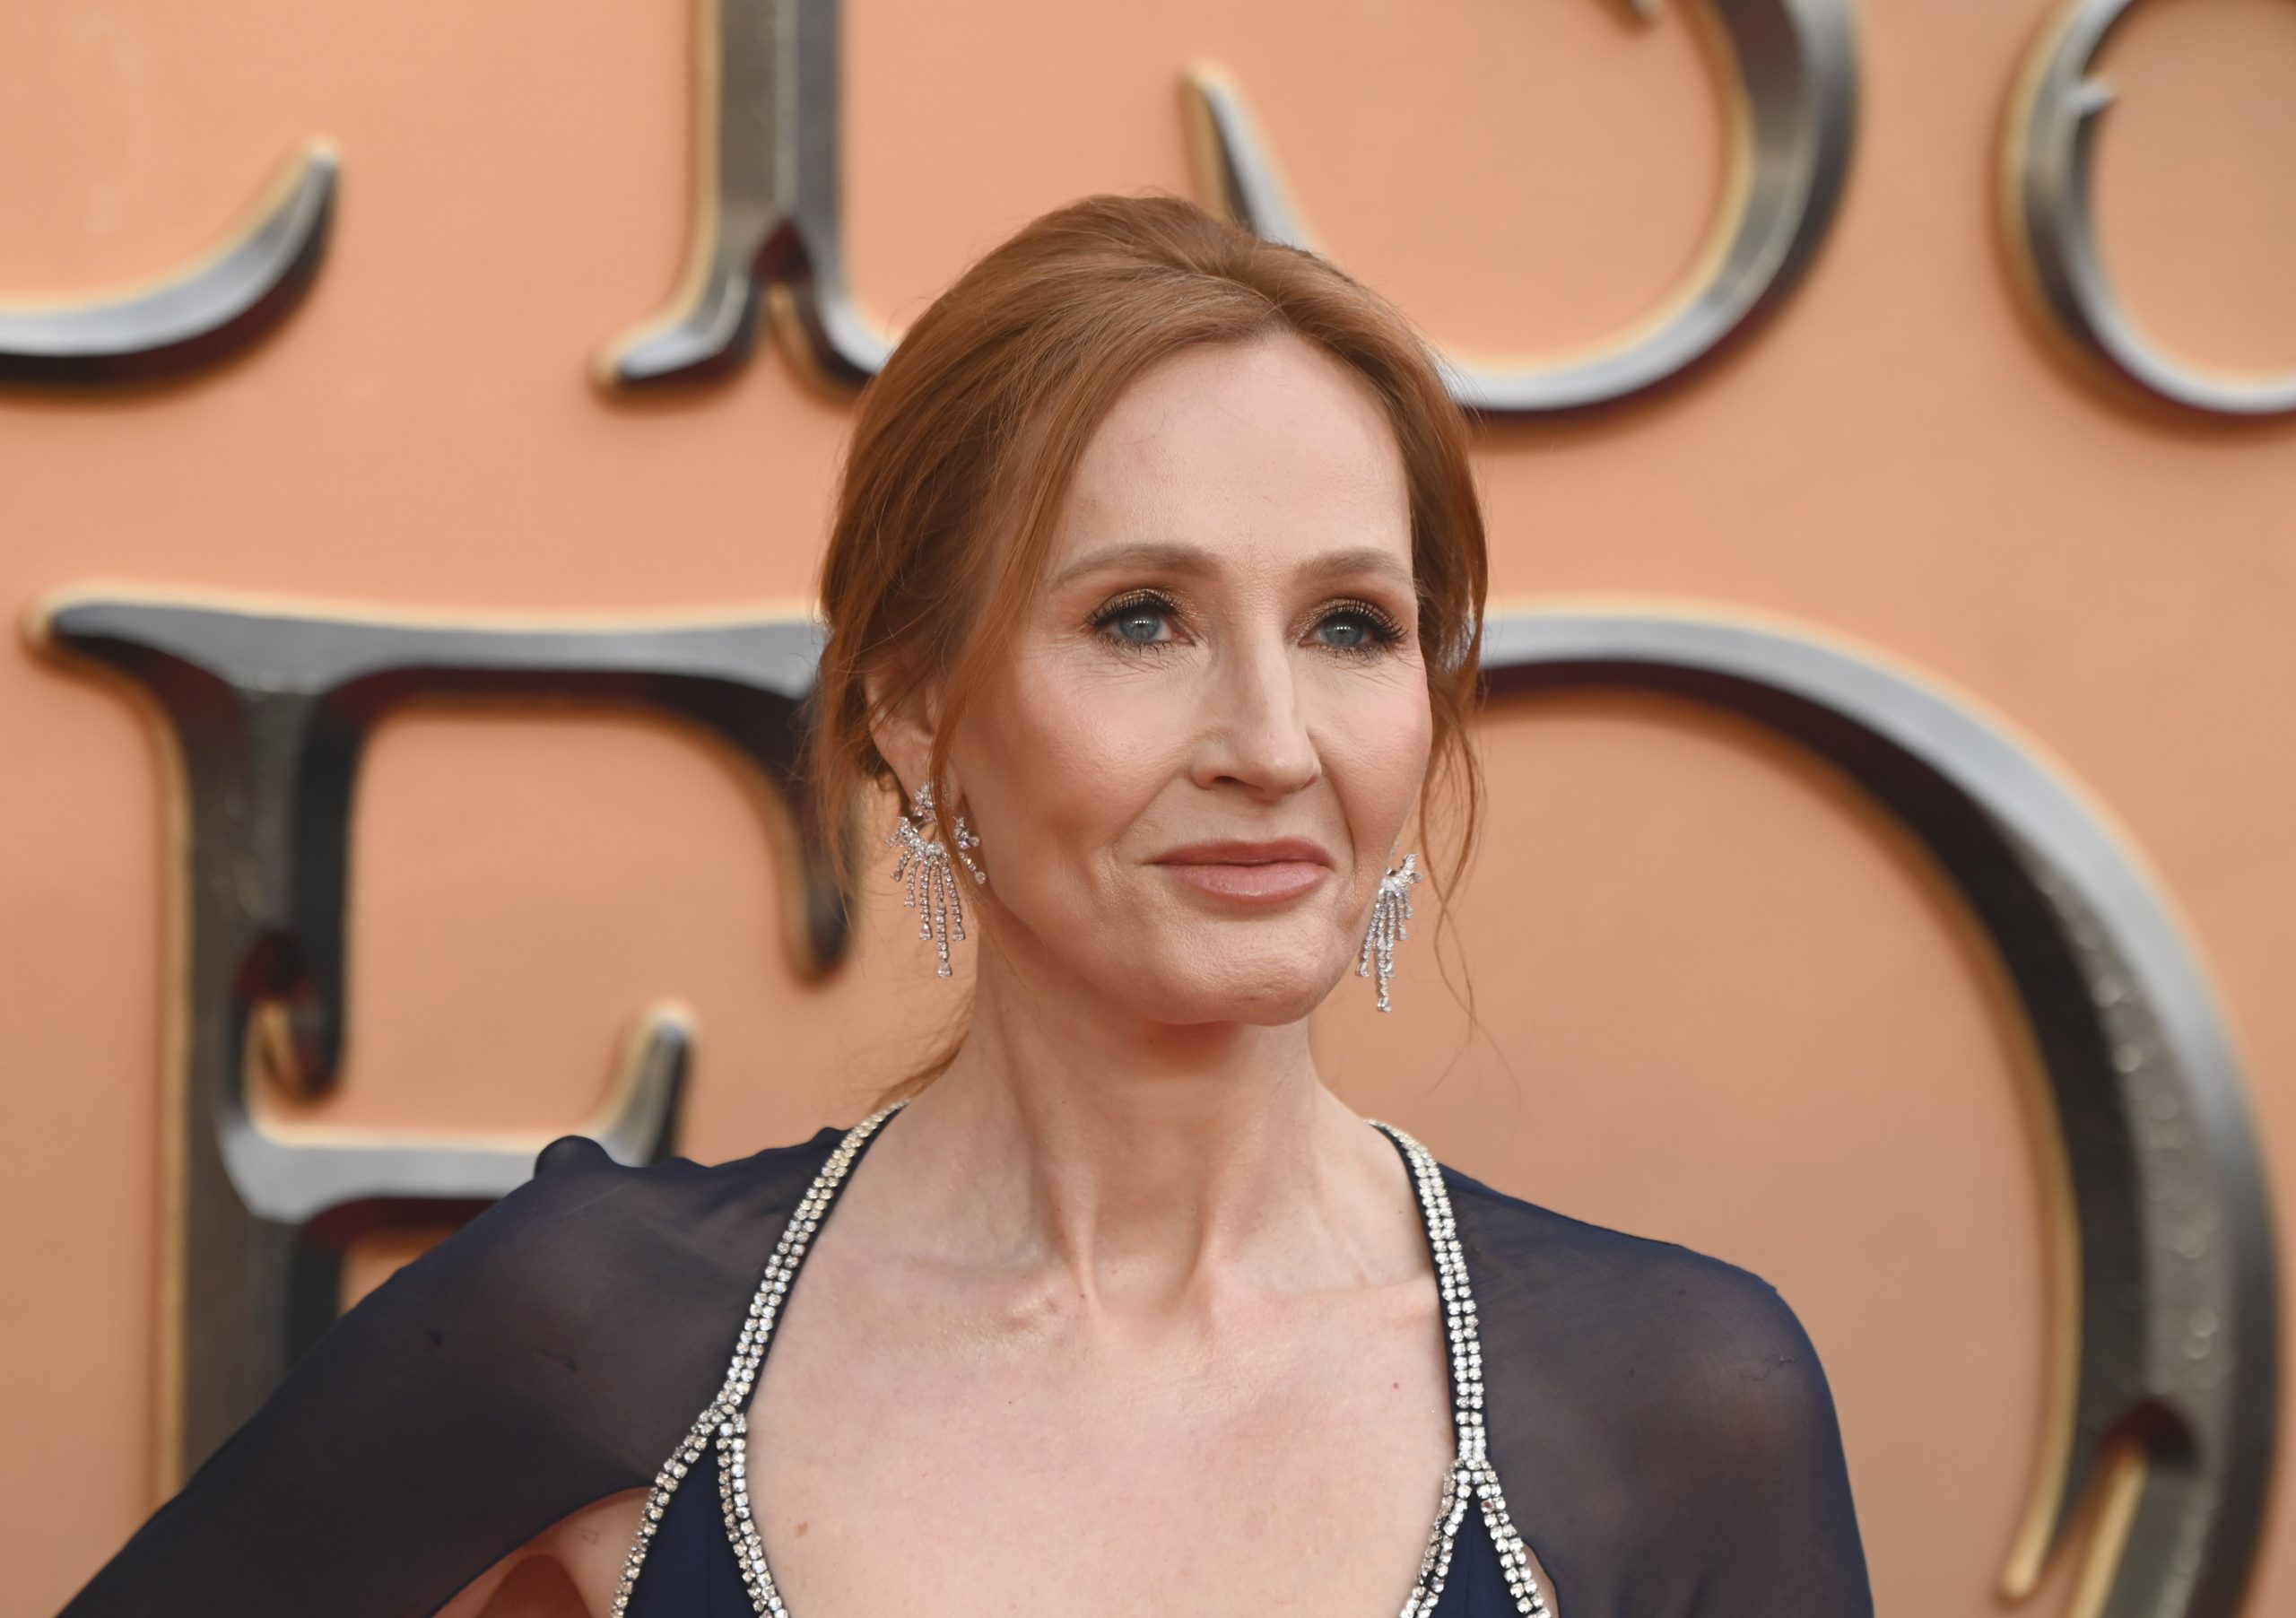 The Harry Potter star comes to JK Rowling’s defense